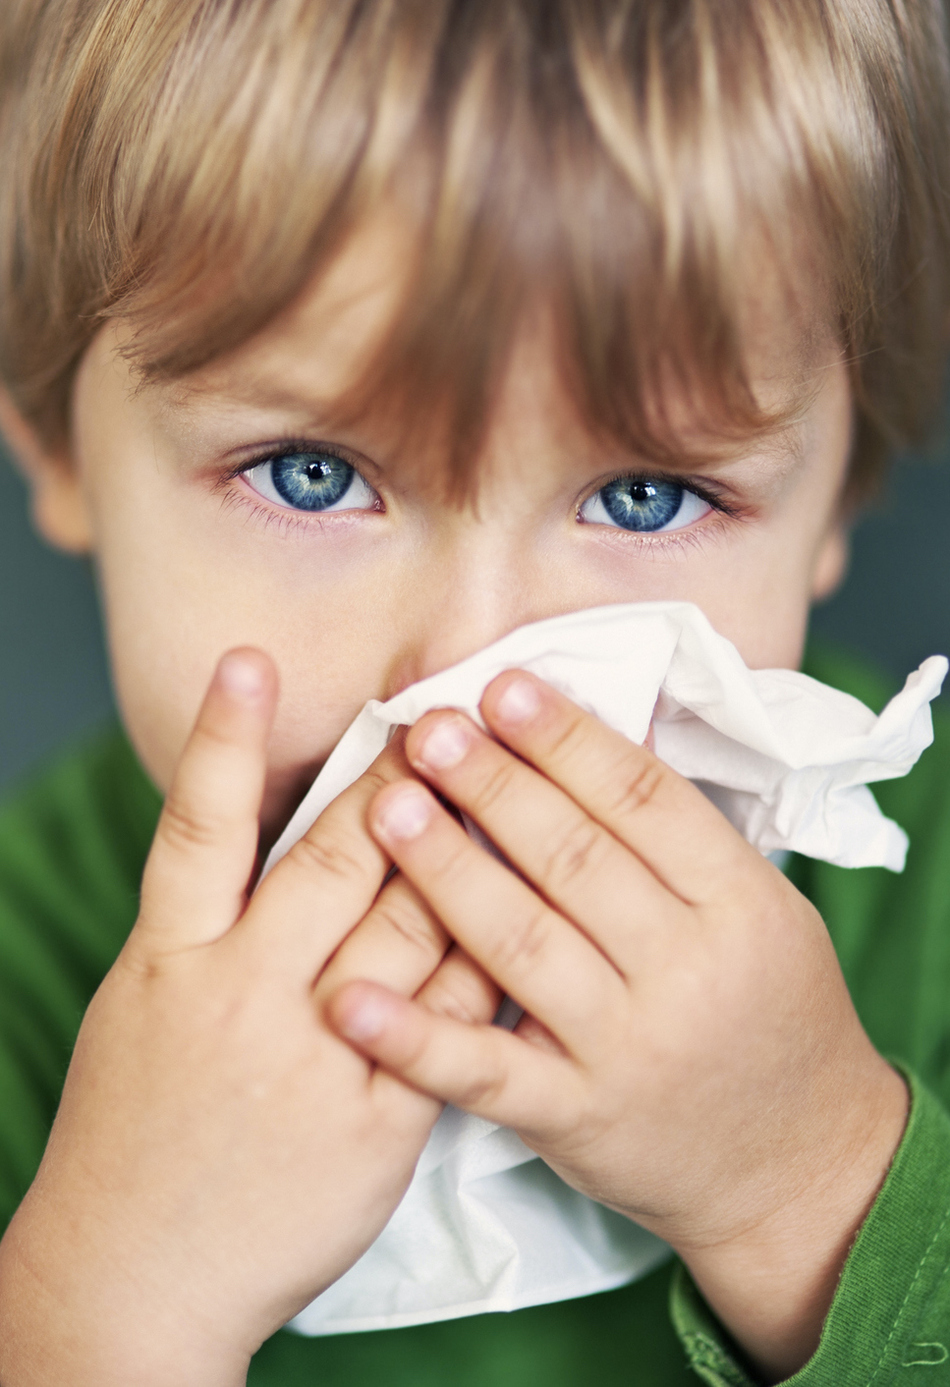 Why Does My Child Get Frequent Nosebleeds?